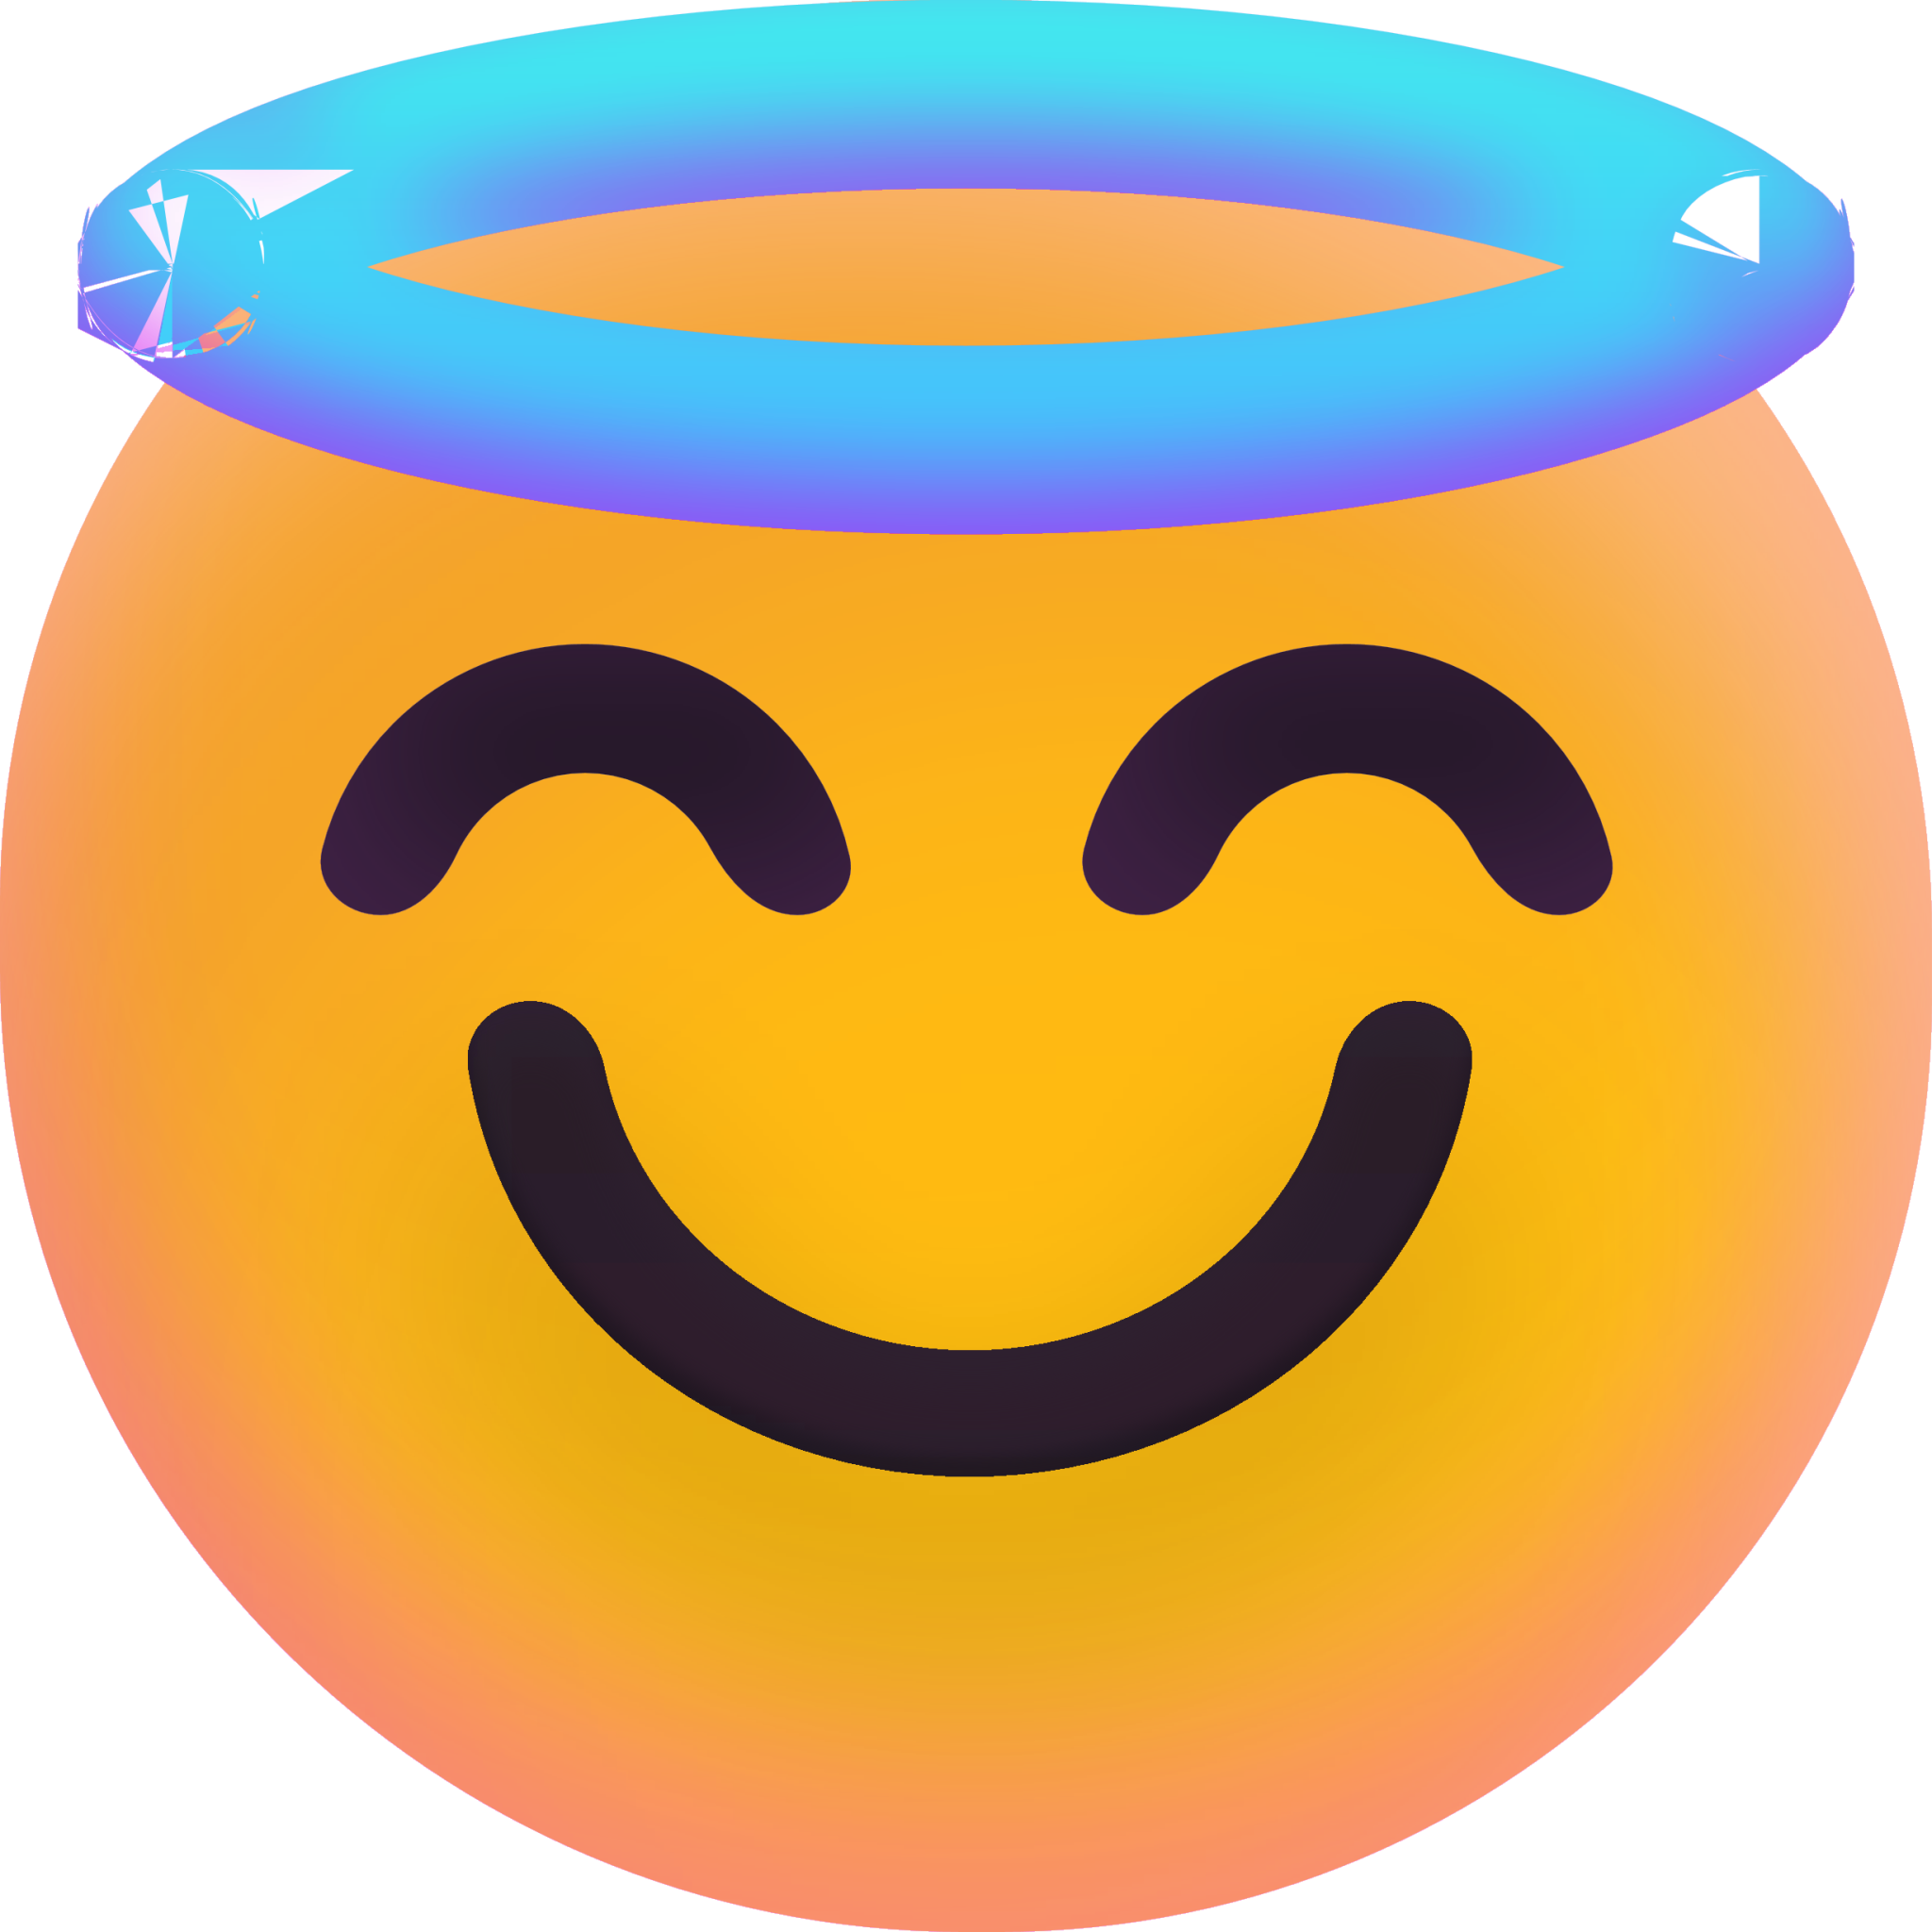 Smiling Face with Halo emoji